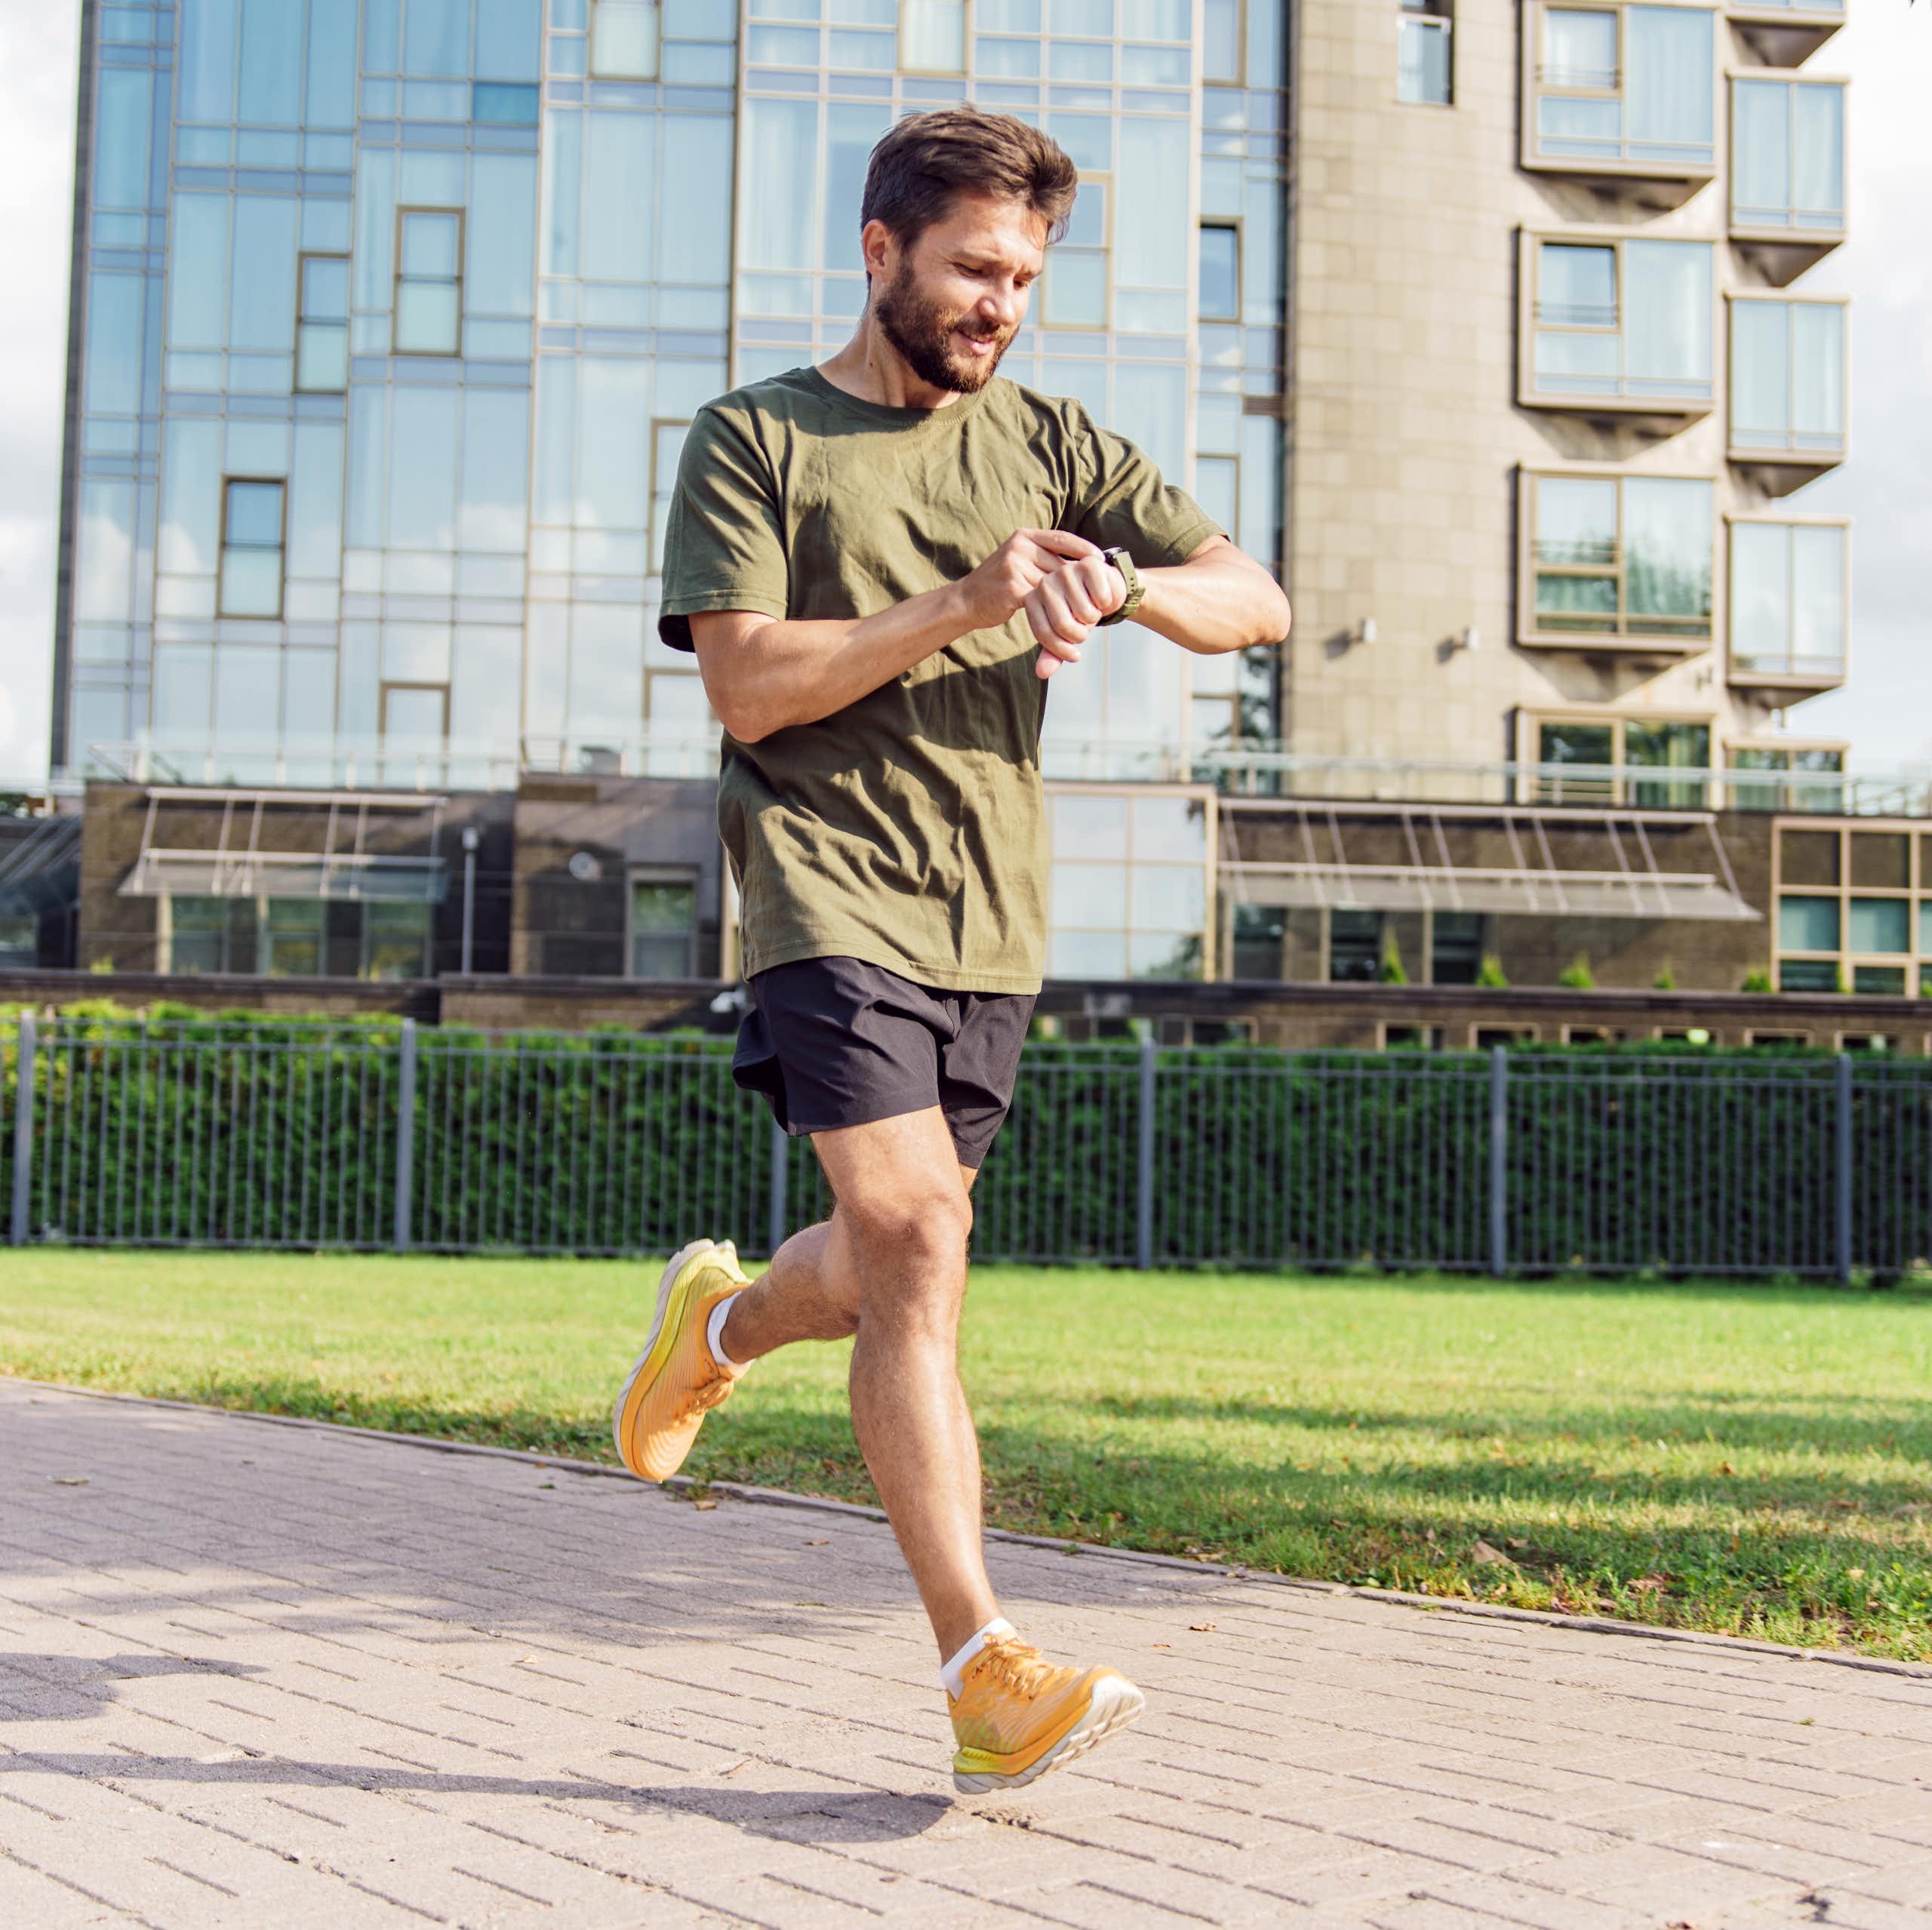 A man checks his smart watch while out on a run.